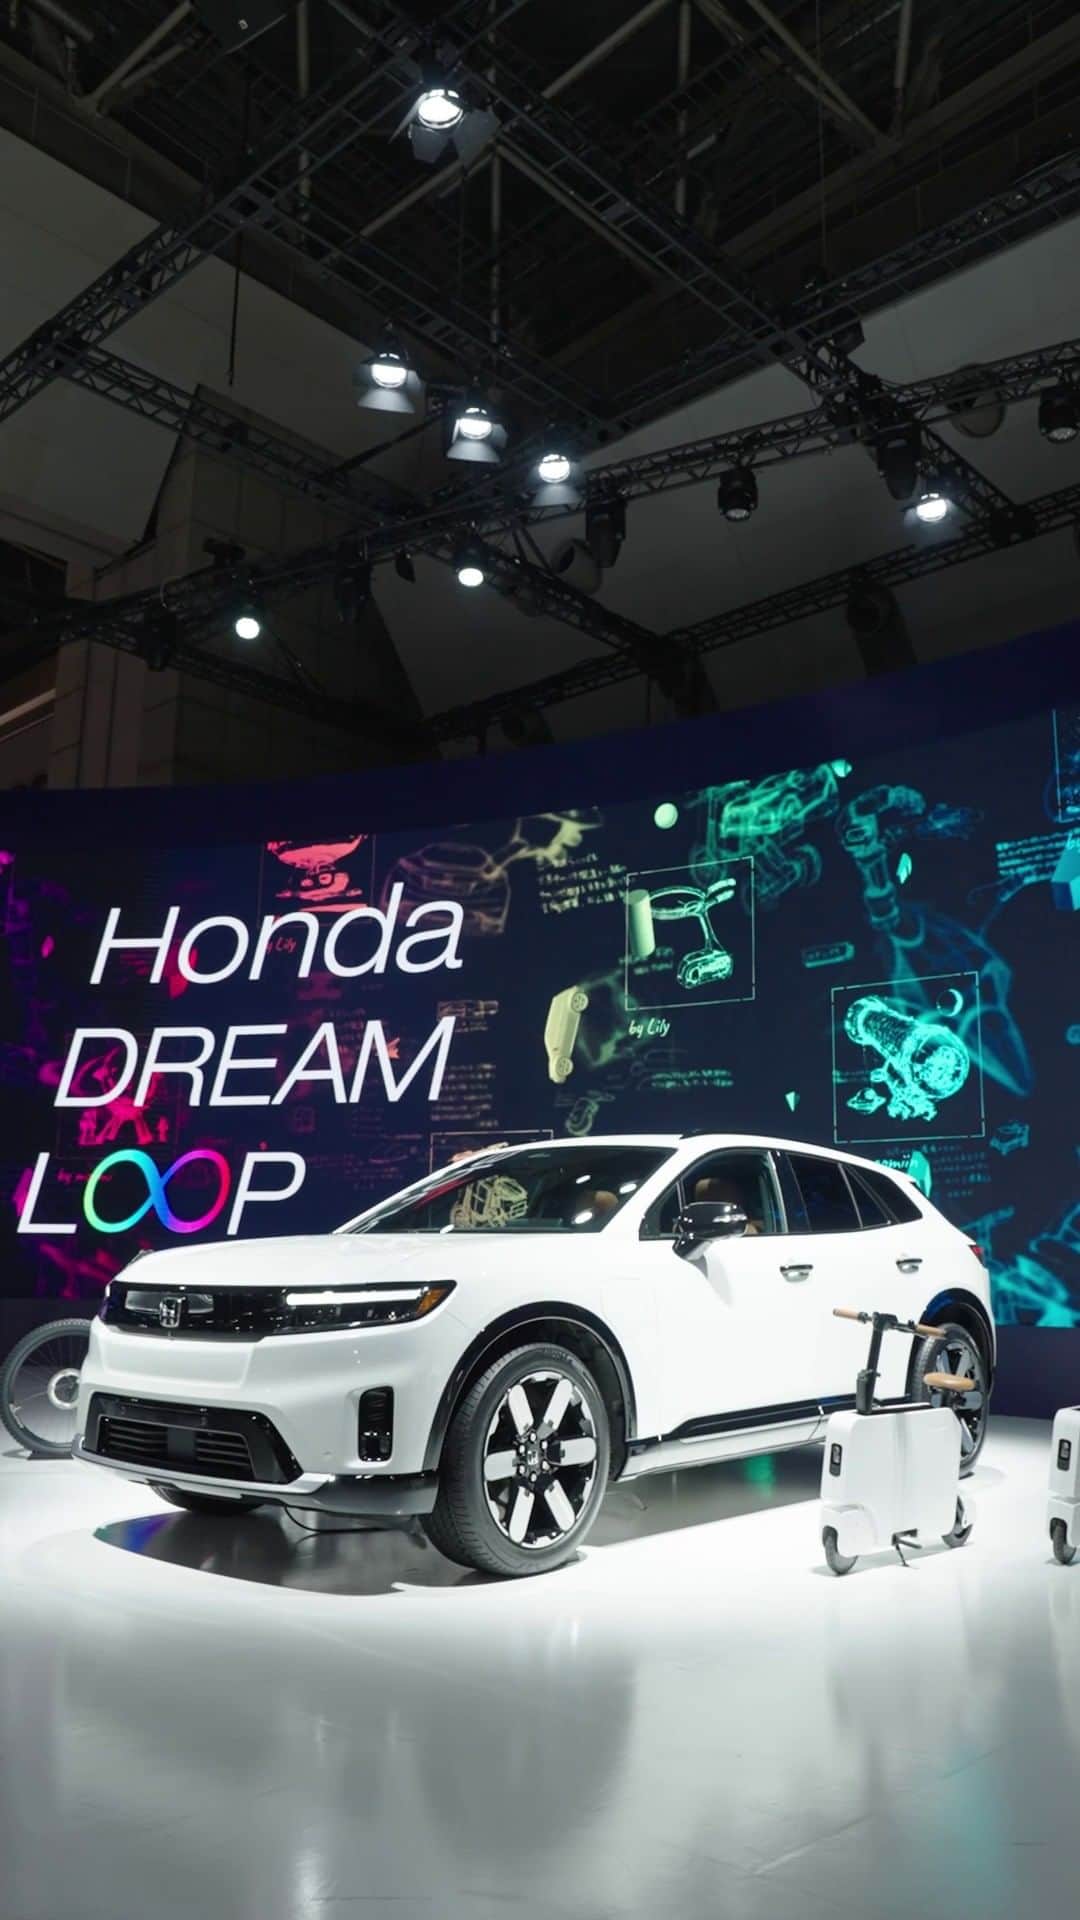 Honda 本田技研工業(株)のインスタグラム：「#PROLOGUE Prototype On Display at #JMS2023  As the name suggests, PROLOGUE symbolizes the key role it plays in Honda’s electrification strategy of EVs in North America, and it is displayed to the public for the first time in Japan.  The Motocompacto, a lightweight and compact body yet powerful scooter with a maximum range of around 12miles on a full charge, and the e-MTB, a new electric mountain bike that combines the fun of motorcycle and MTB riding, are also on display.  #JapanMobilityShow で #プロローグ 展示中  北米におけるEV本格展開の先駆けであるPROLOGUEが日本初の一般公開。  軽くコンパクトながらフル充電時の最大航続距離は約19kmとパワフルなMotocompacto（モトコンパクト）と、モーターサイクルとMTBのFUNが融合した新しい乗り味のe-MTBも展示中です。  #ThePowerOfDreams #HowWeMoveYou」